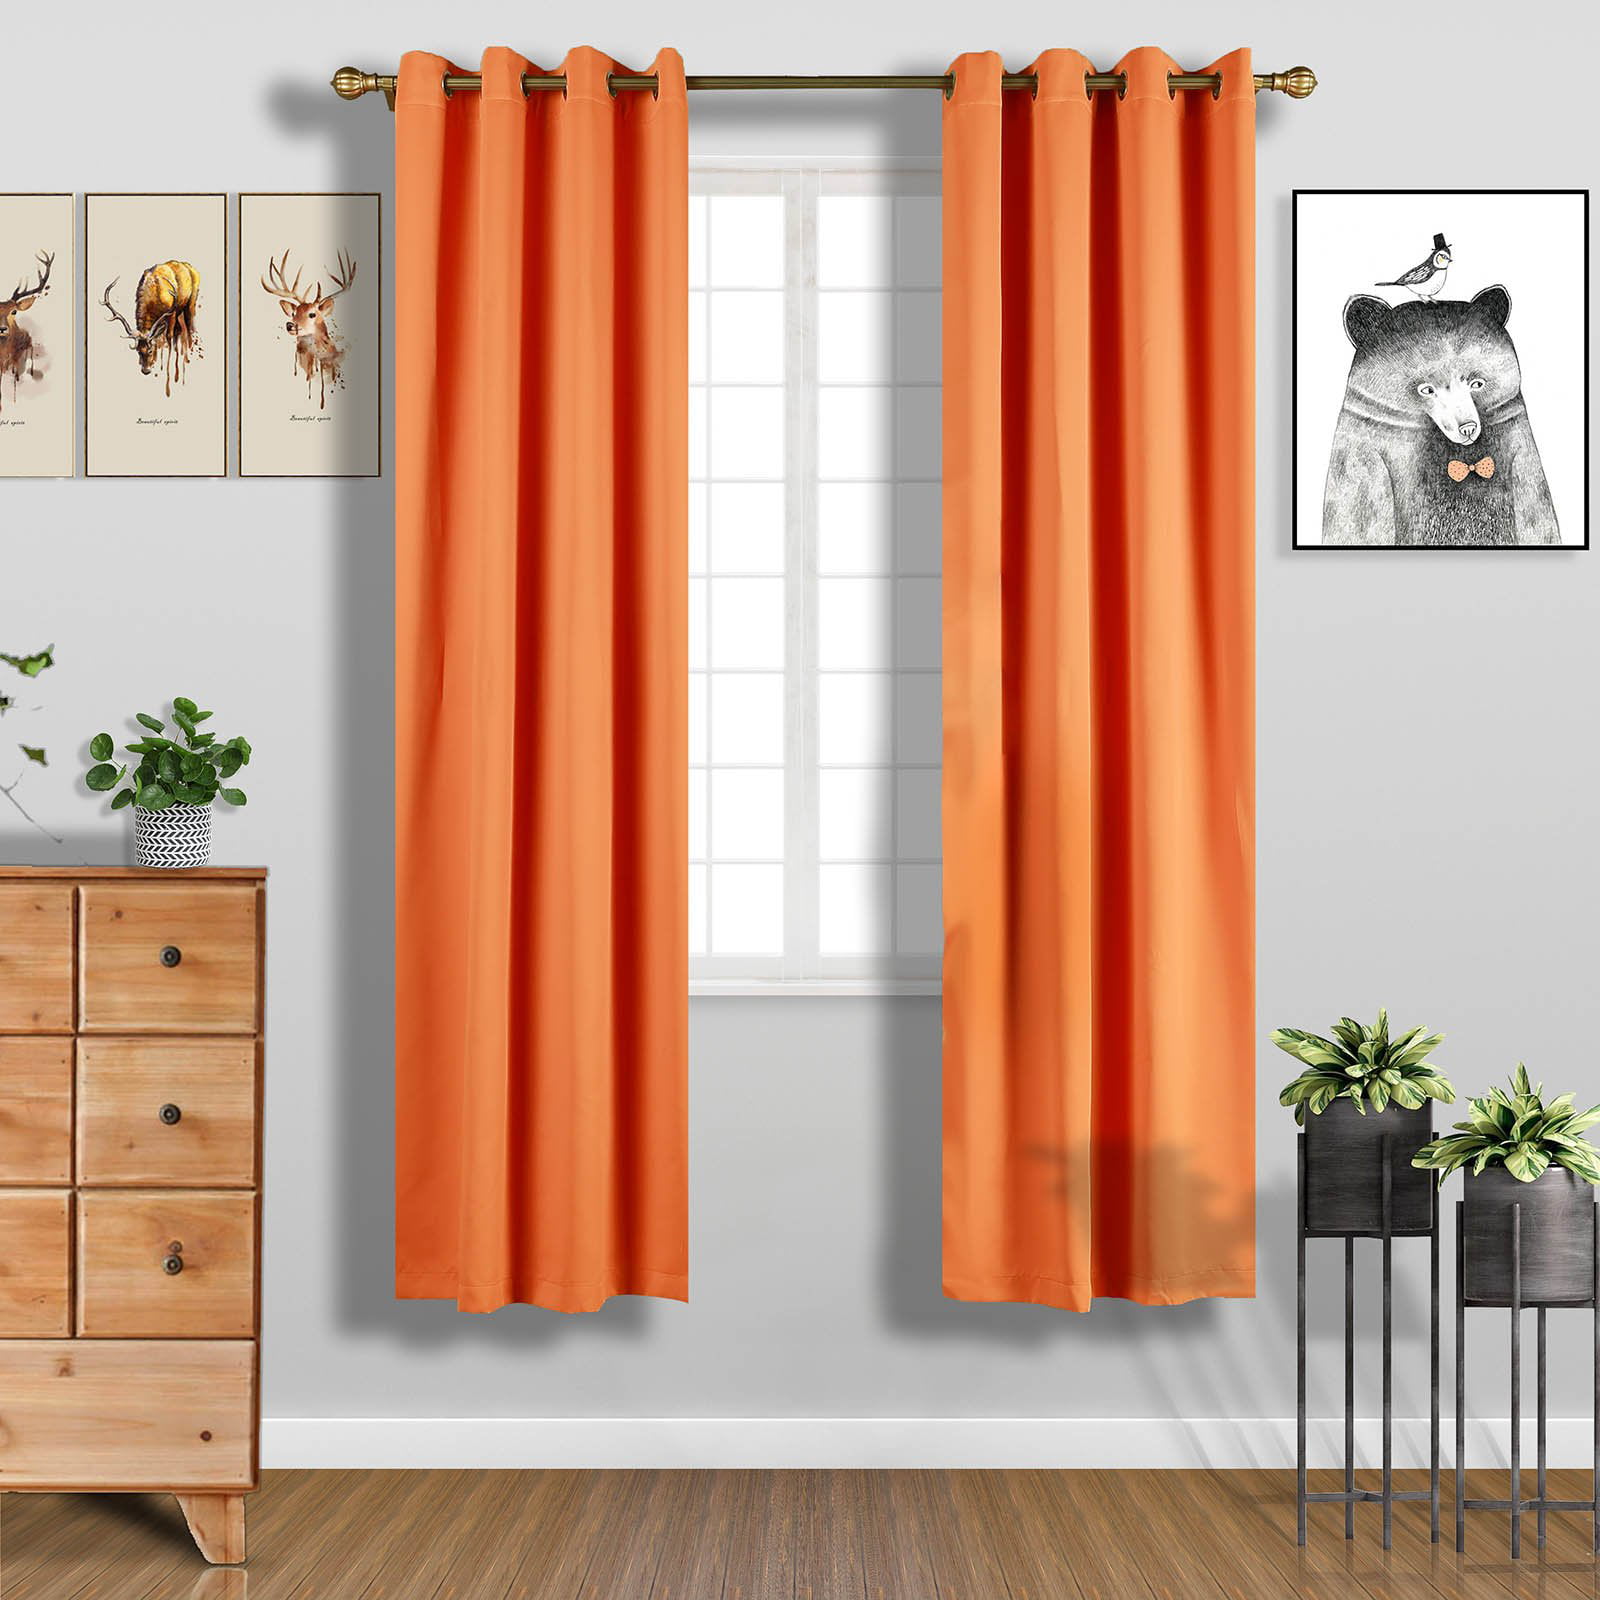 Coral Blackout Curtains | 2 Packs | 52 x 96 Inch Grommet Curtains